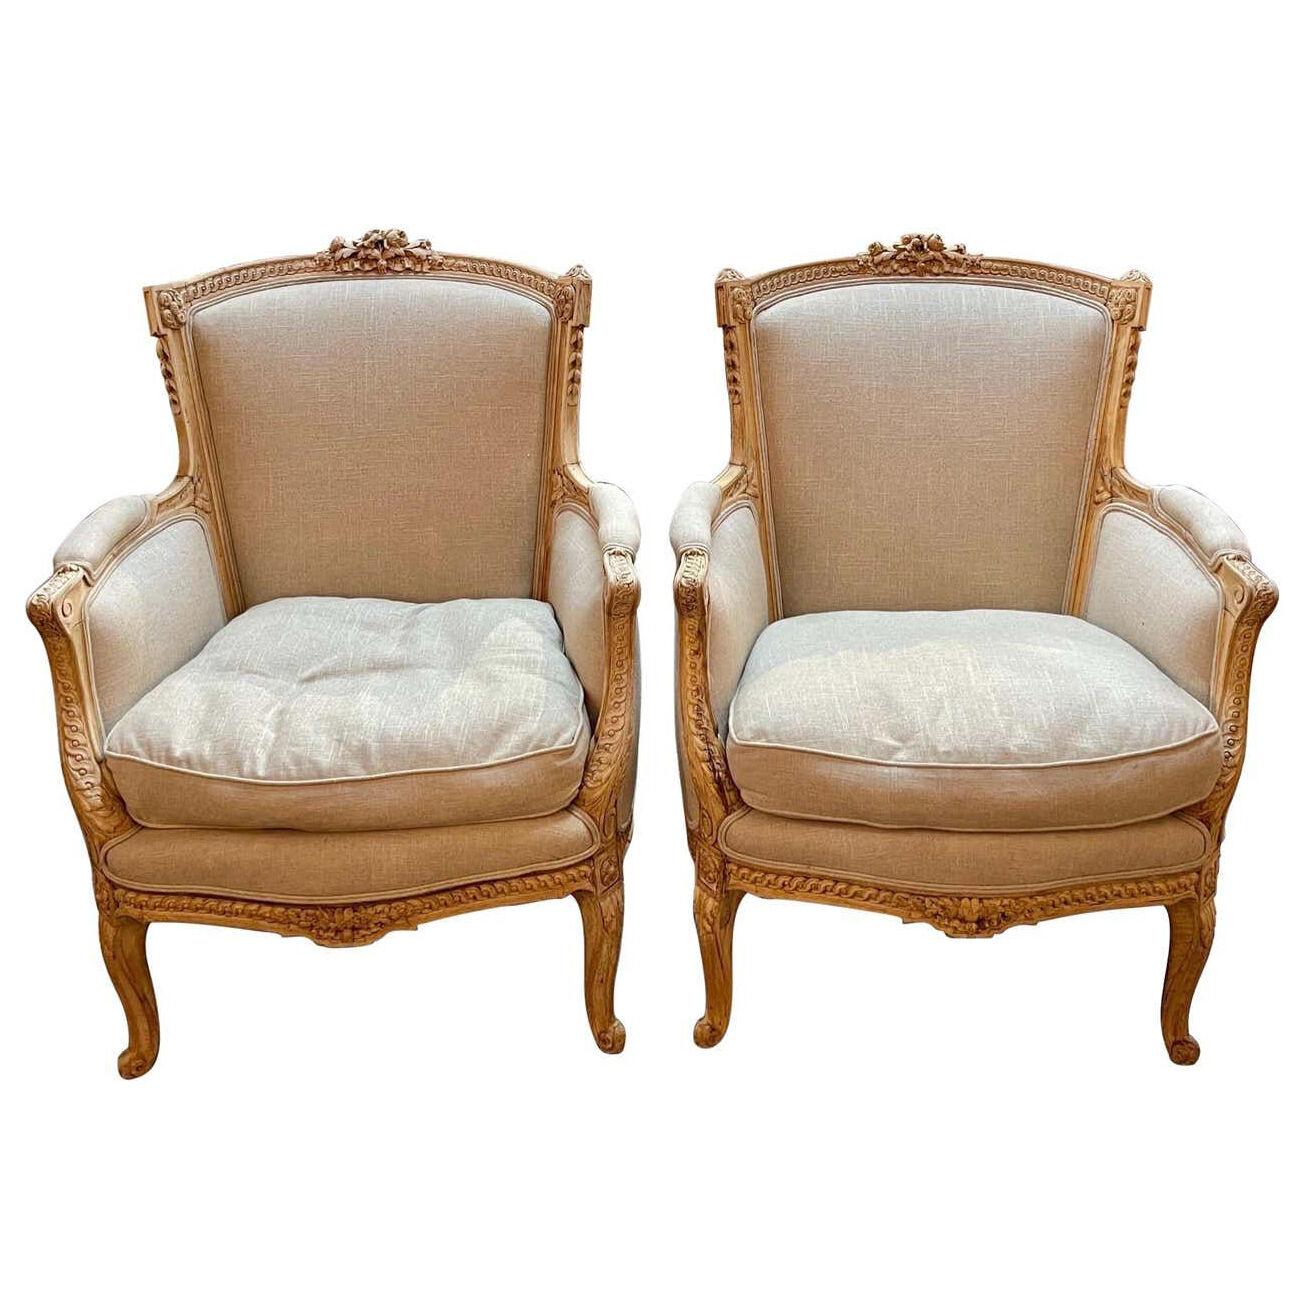 Pair of 19th Century French Carved and Bleached Oak Armchairs